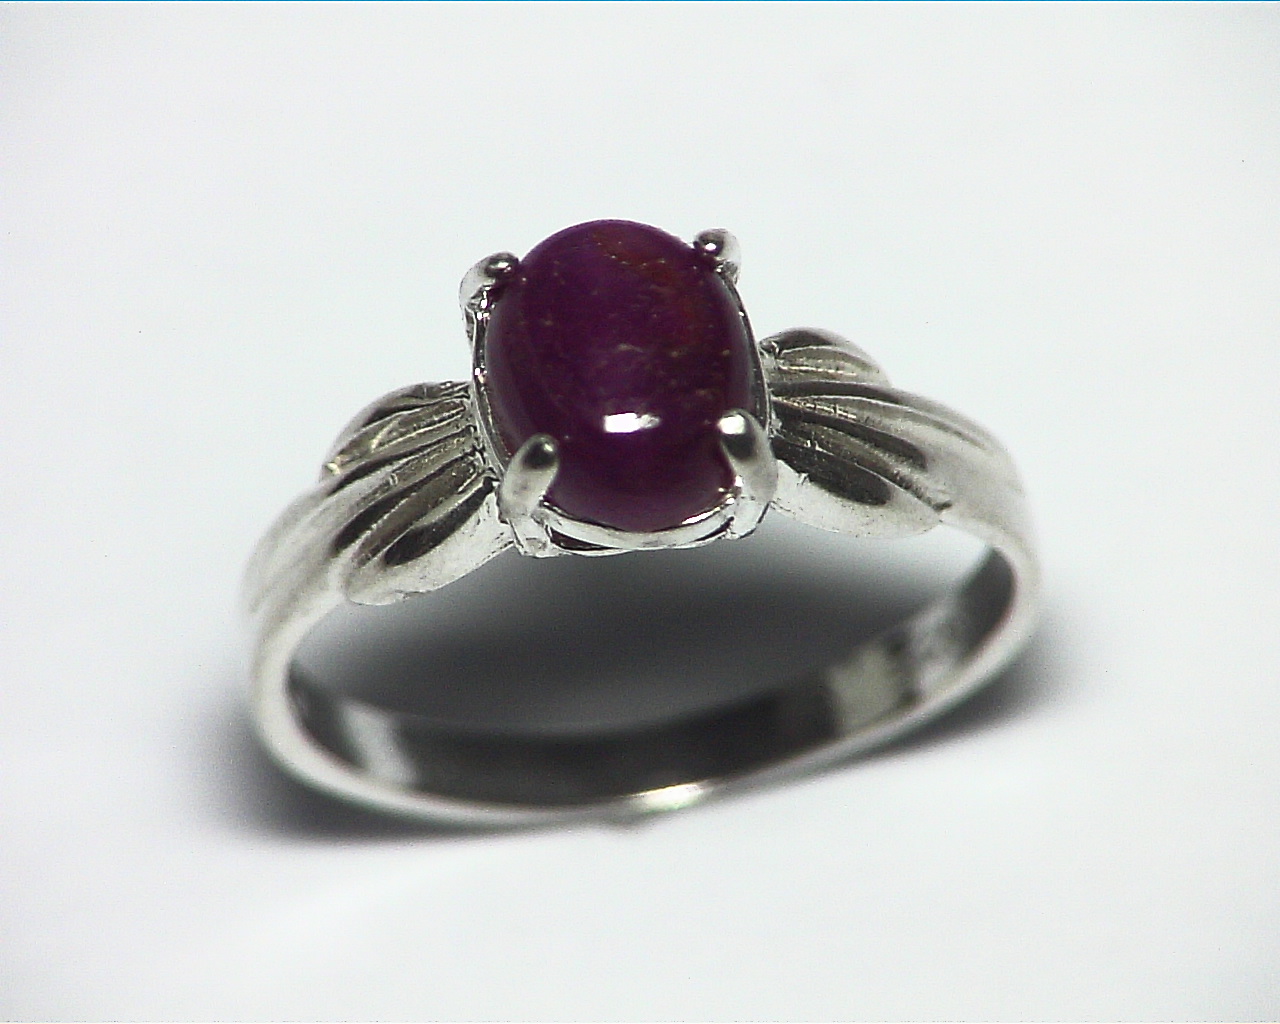 Star Ruby Cabochon Natural Genuine Gemstone Sterling Silver Ring RSS,488